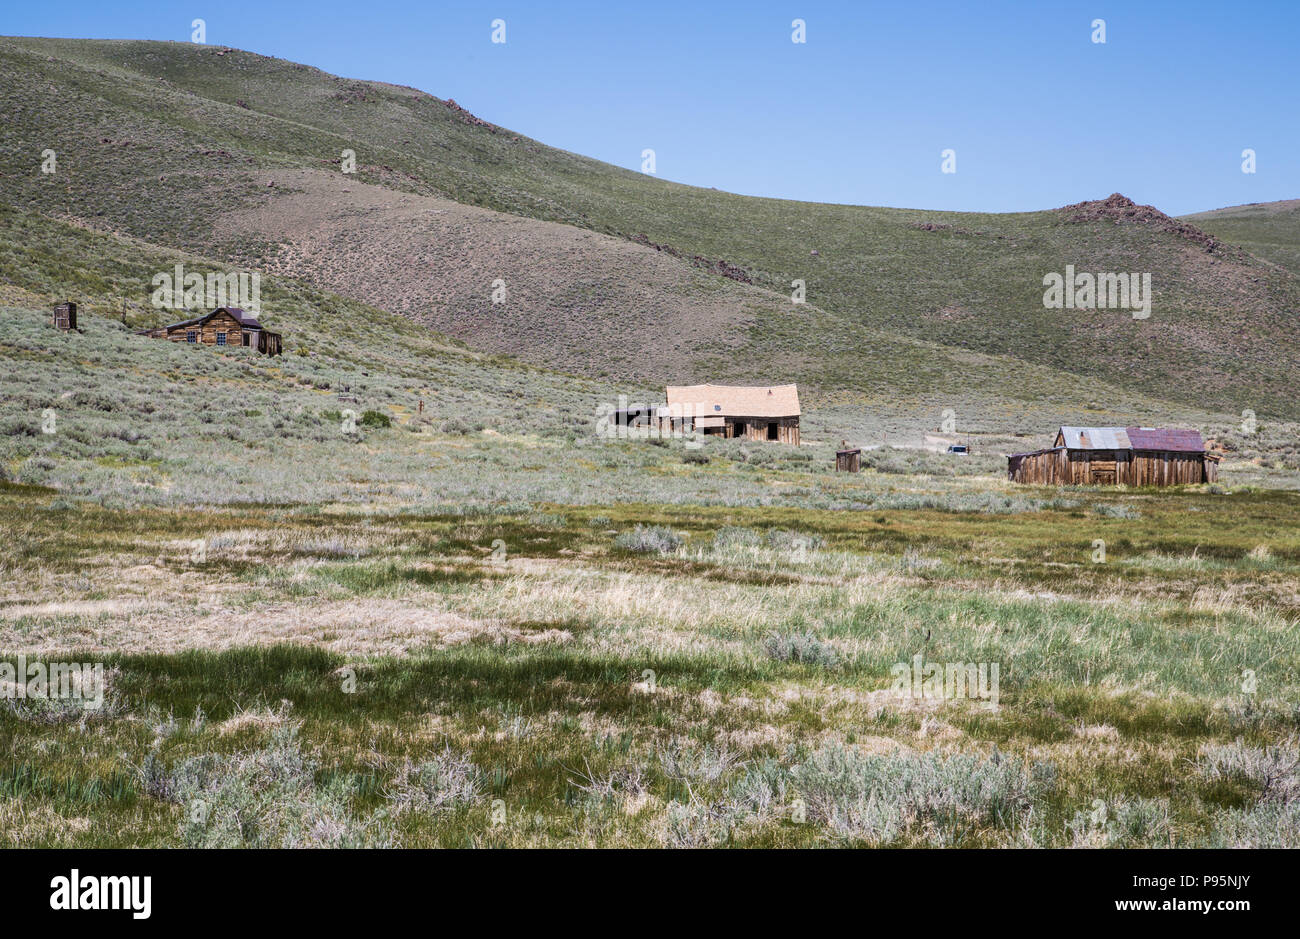 Abandoned homes in the distance in the ghost town of Bodie, California, a mining town from the Old West. Stock Photo